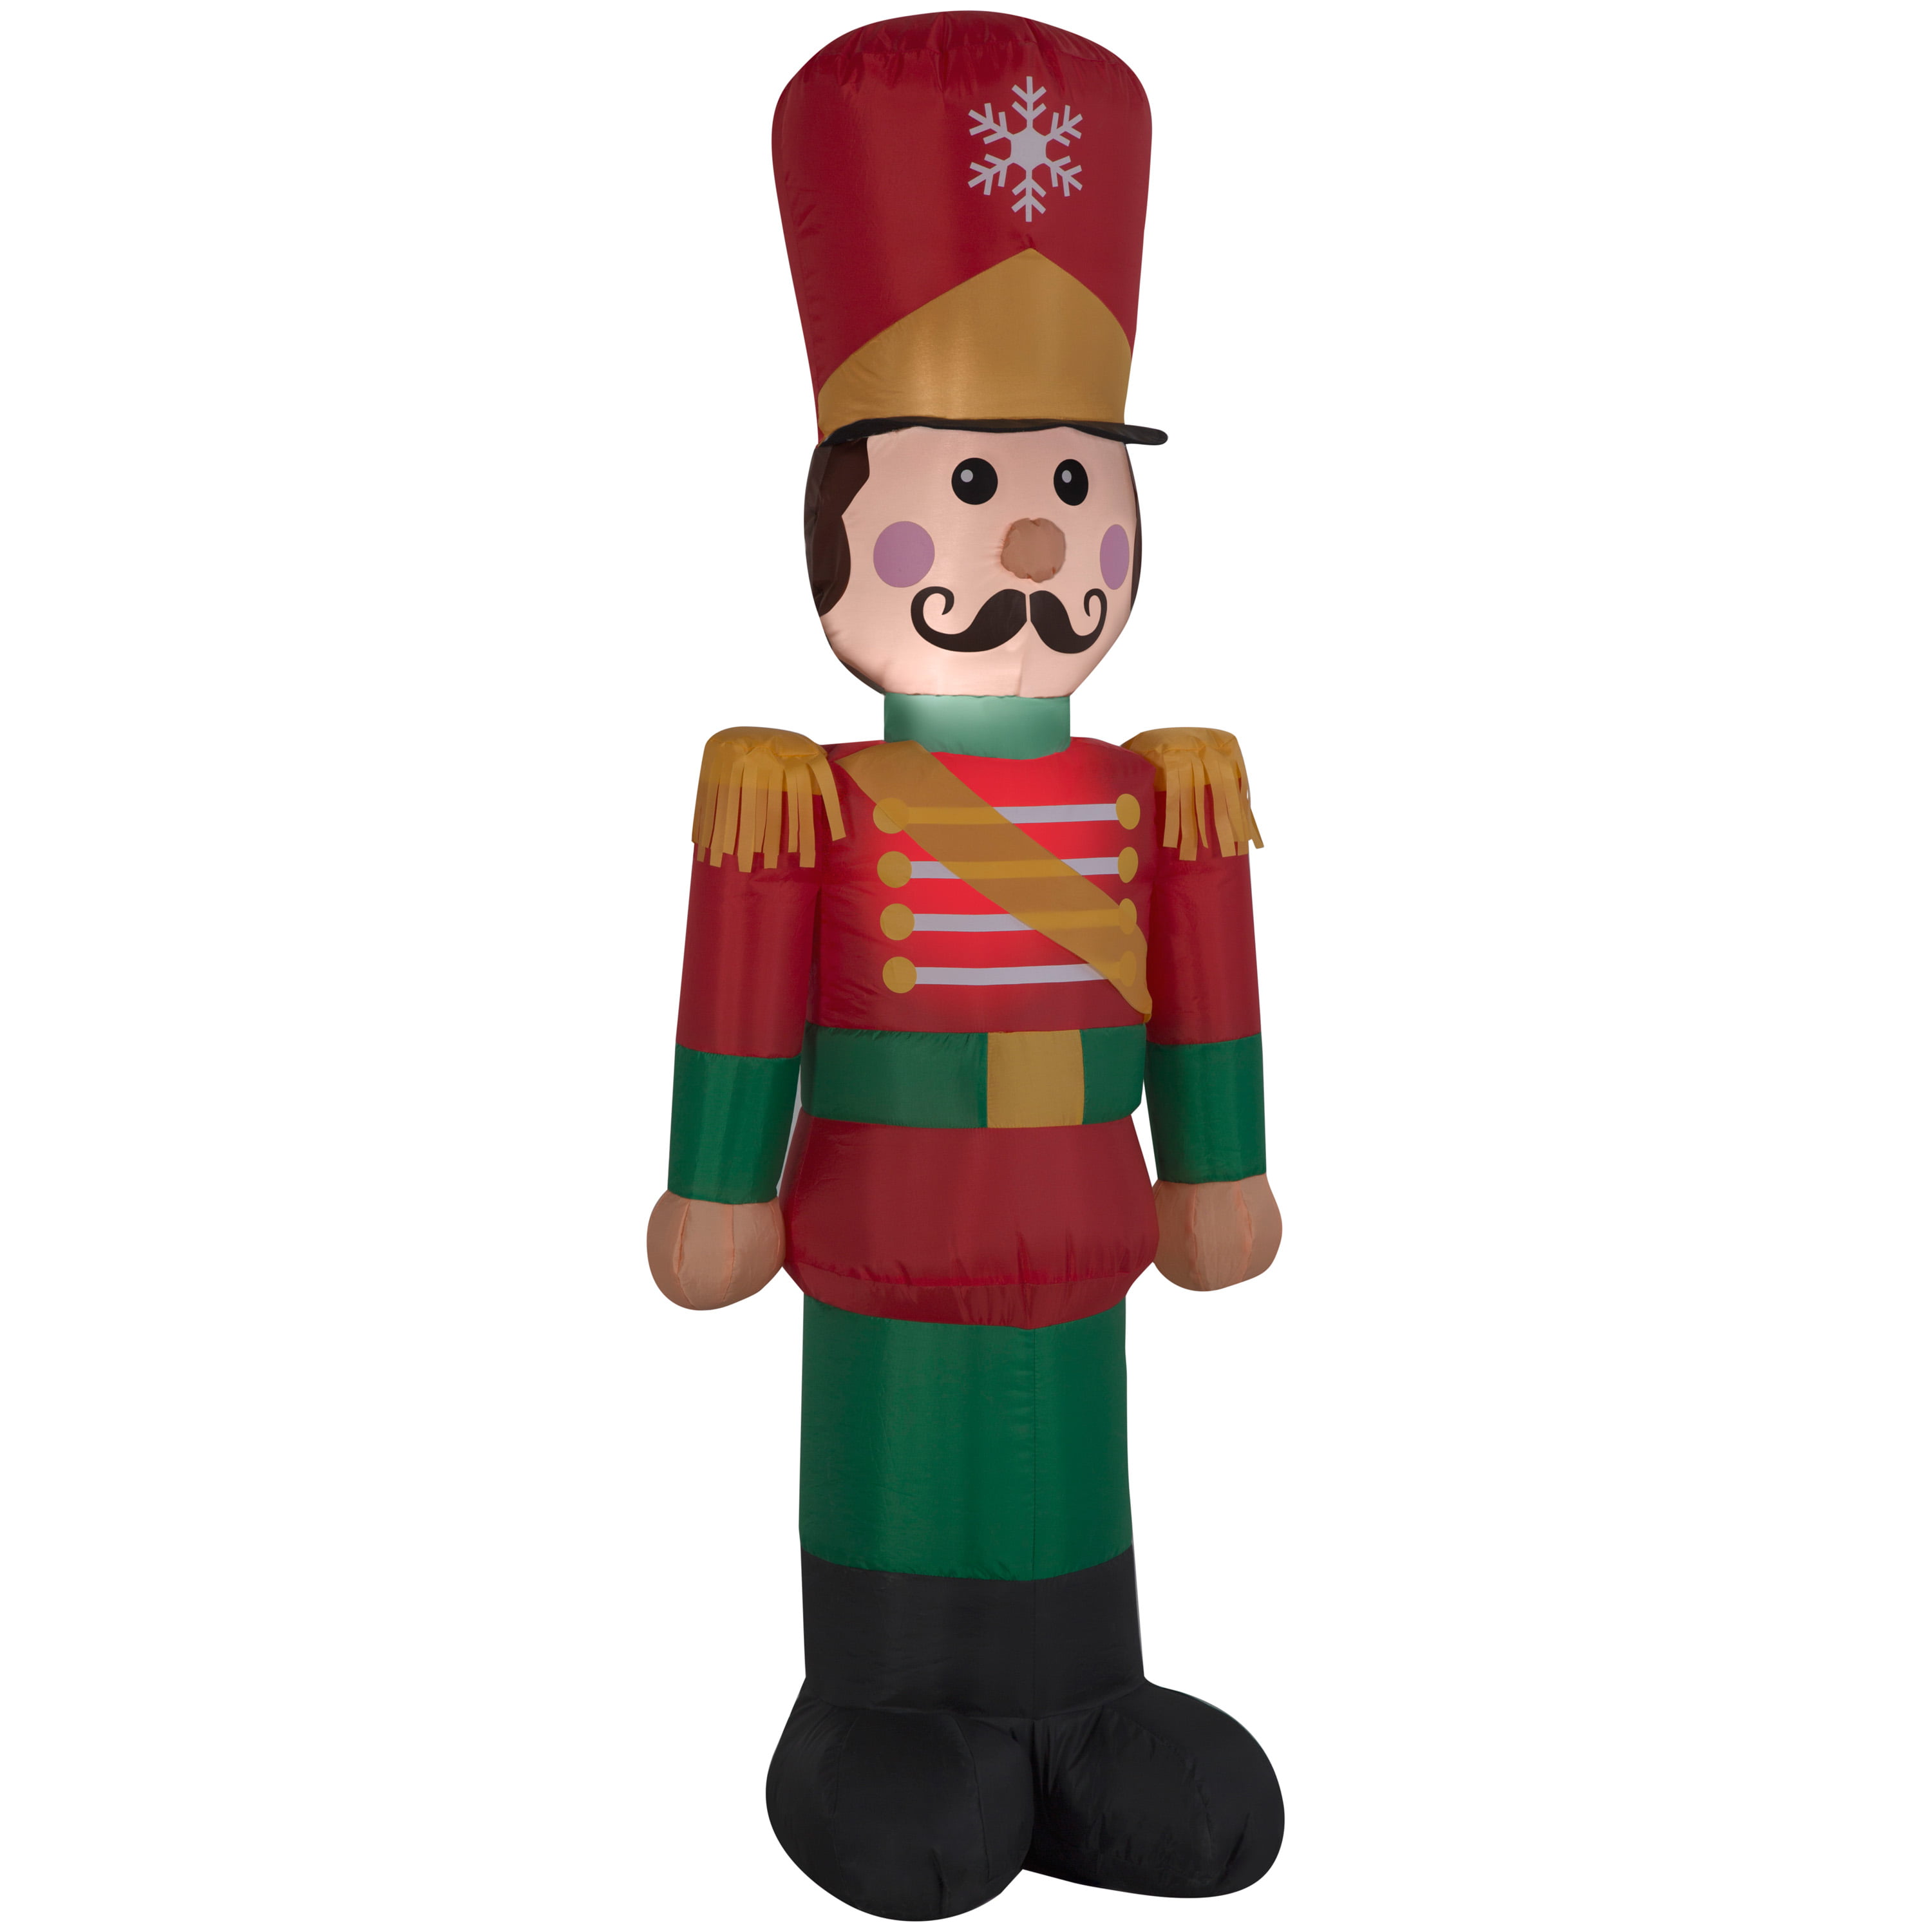 My toy soldier is very nice. Toy Soldiers. Toy Soldier Spotlight. Toy Soldier is on the Table.